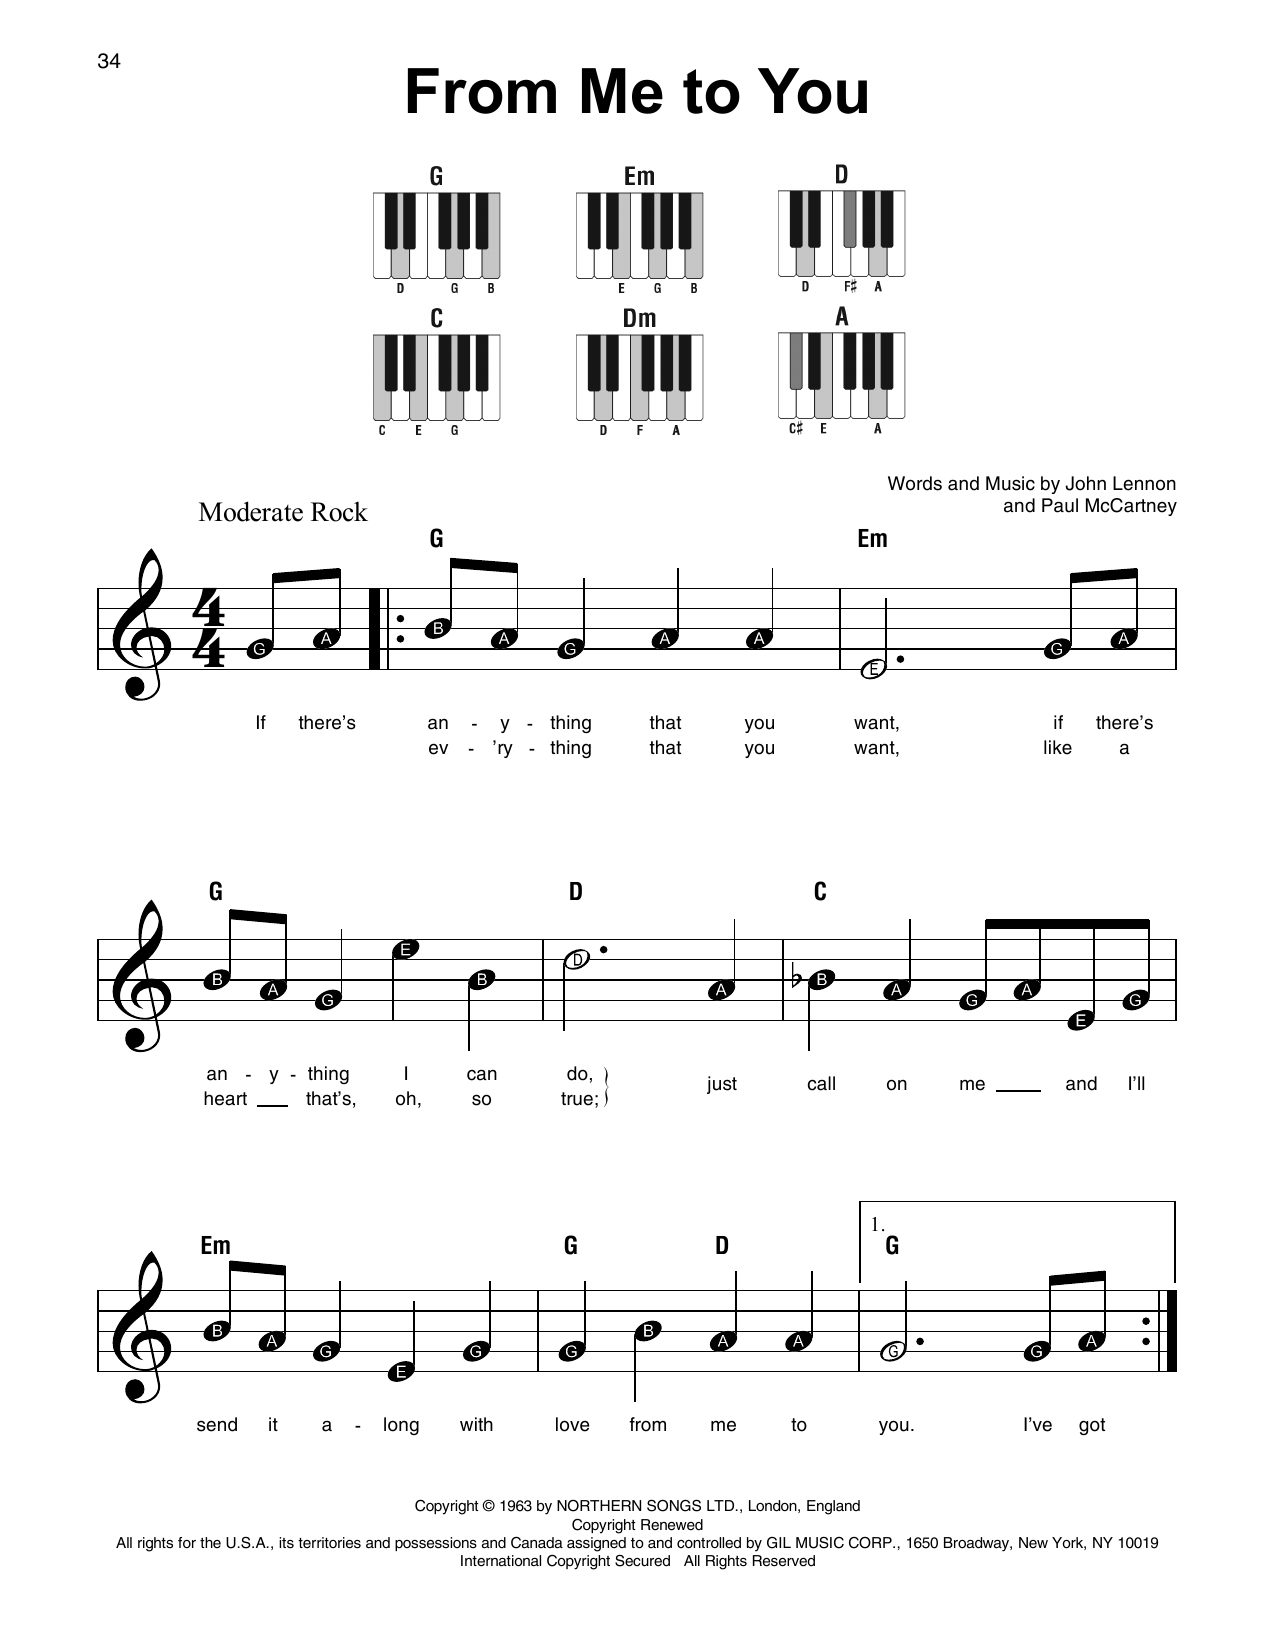 Download The Beatles From Me To You Sheet Music